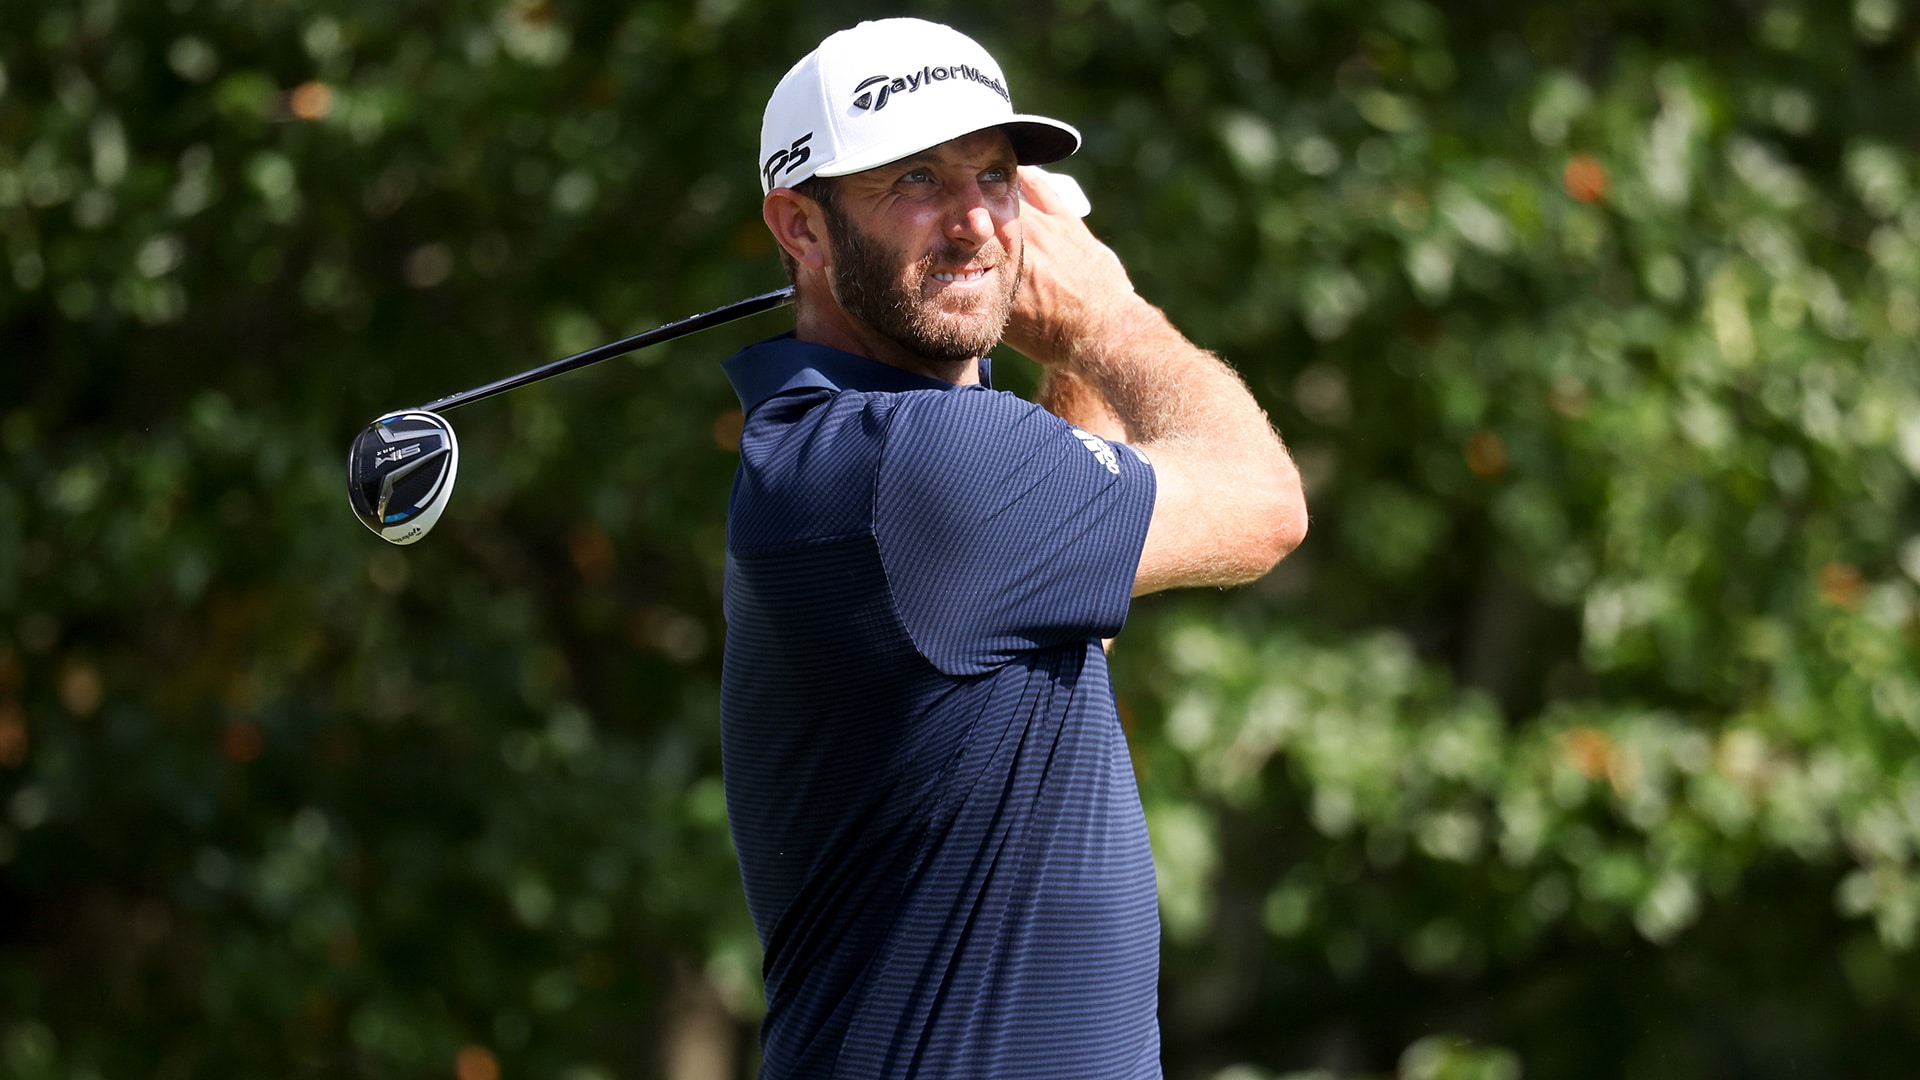 Dustin Johnson becomes fifth player to hold world No. 1 ranking in 2020